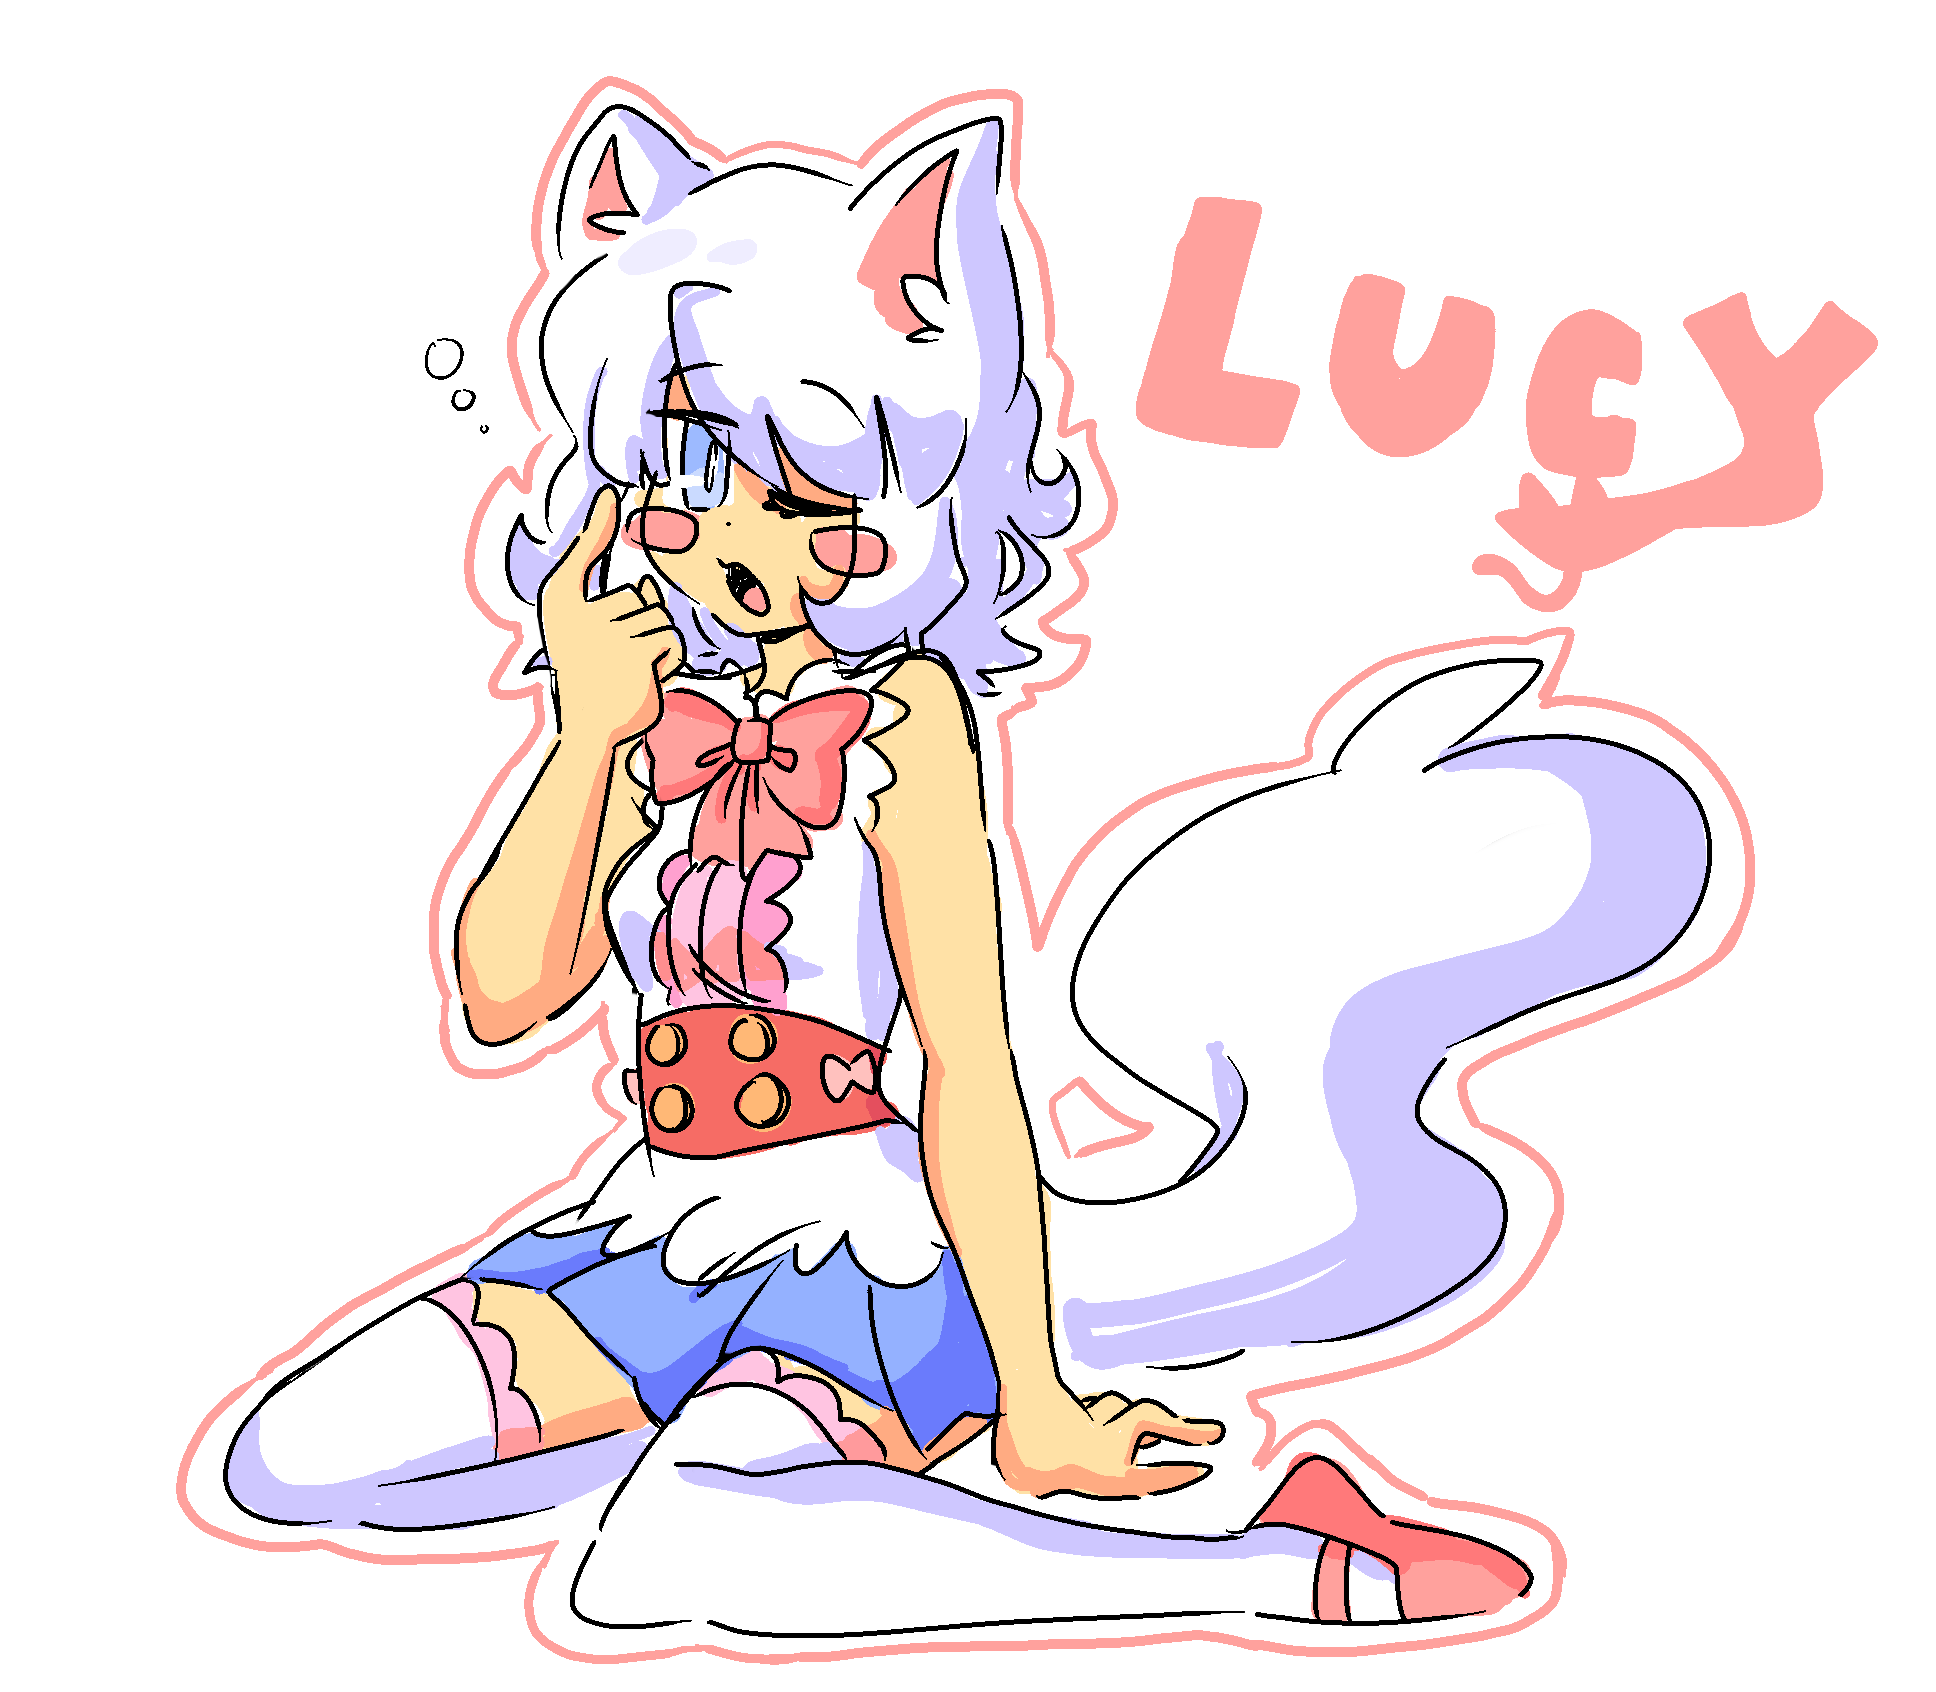 Candybooru image #12688, tagged with Lucy Whimsicott_(Artist) human